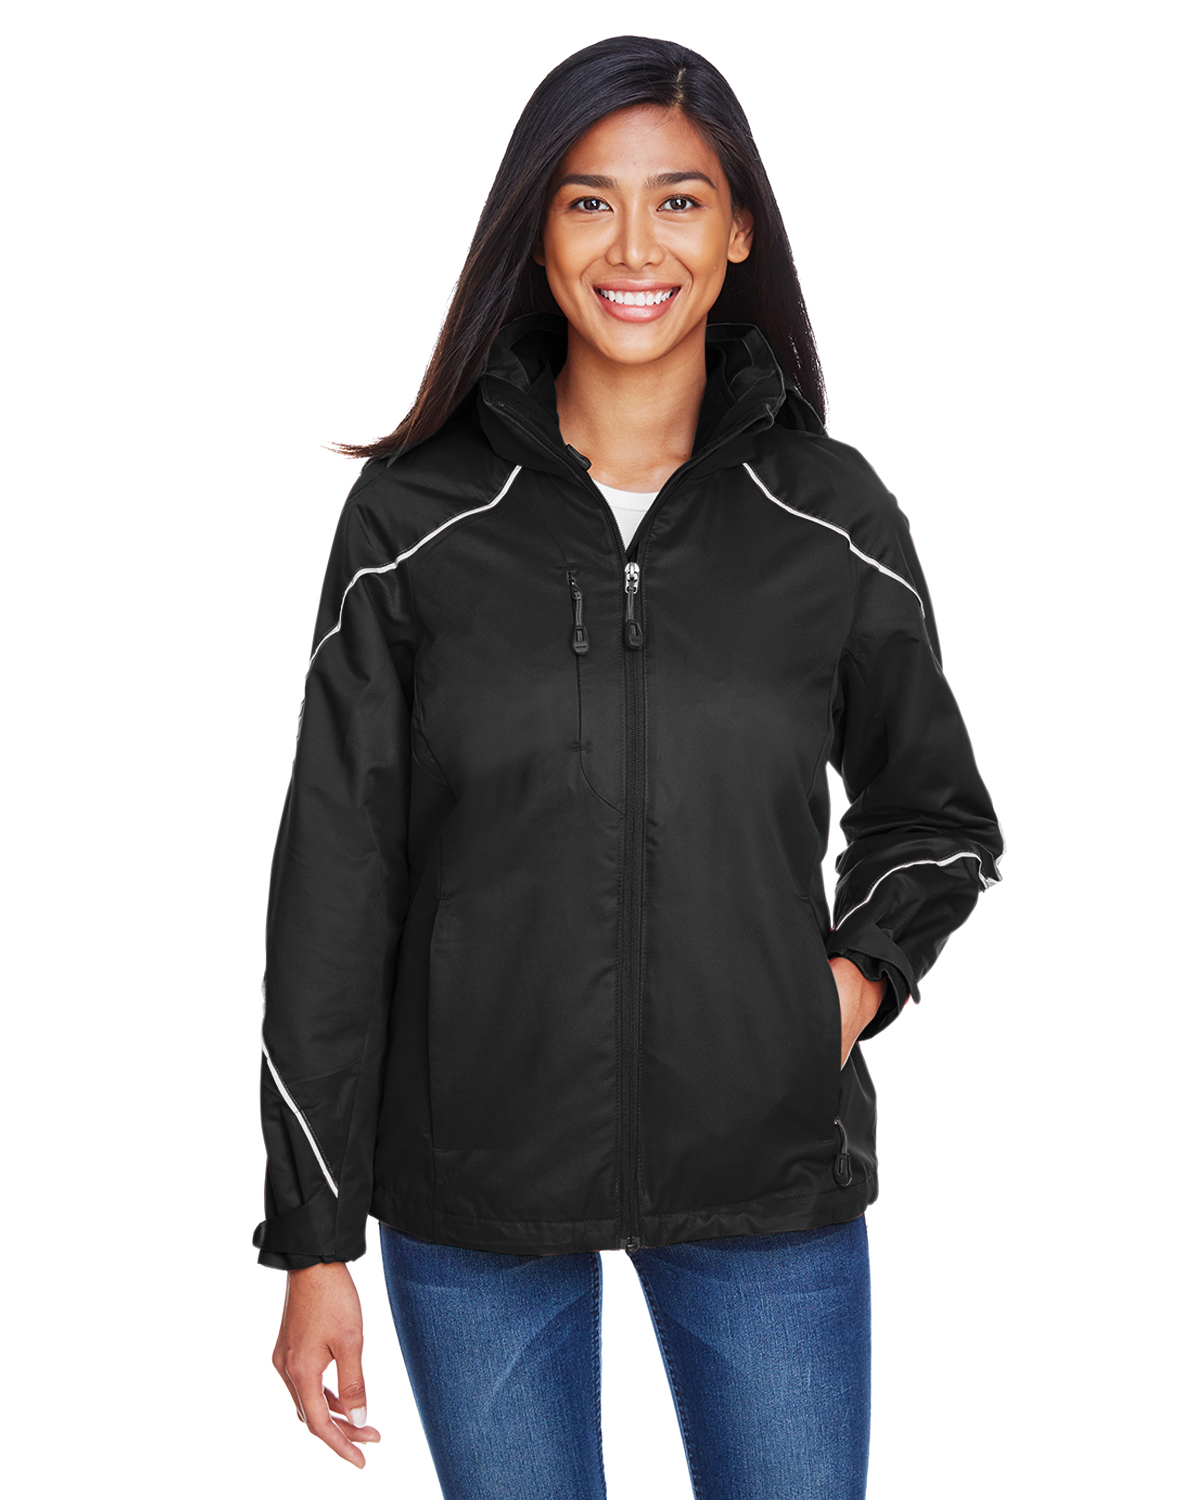 Ladies' Angle 3-in-1 Jacket with Bonded Fleece Liner - BLACK - L - image 1 of 3